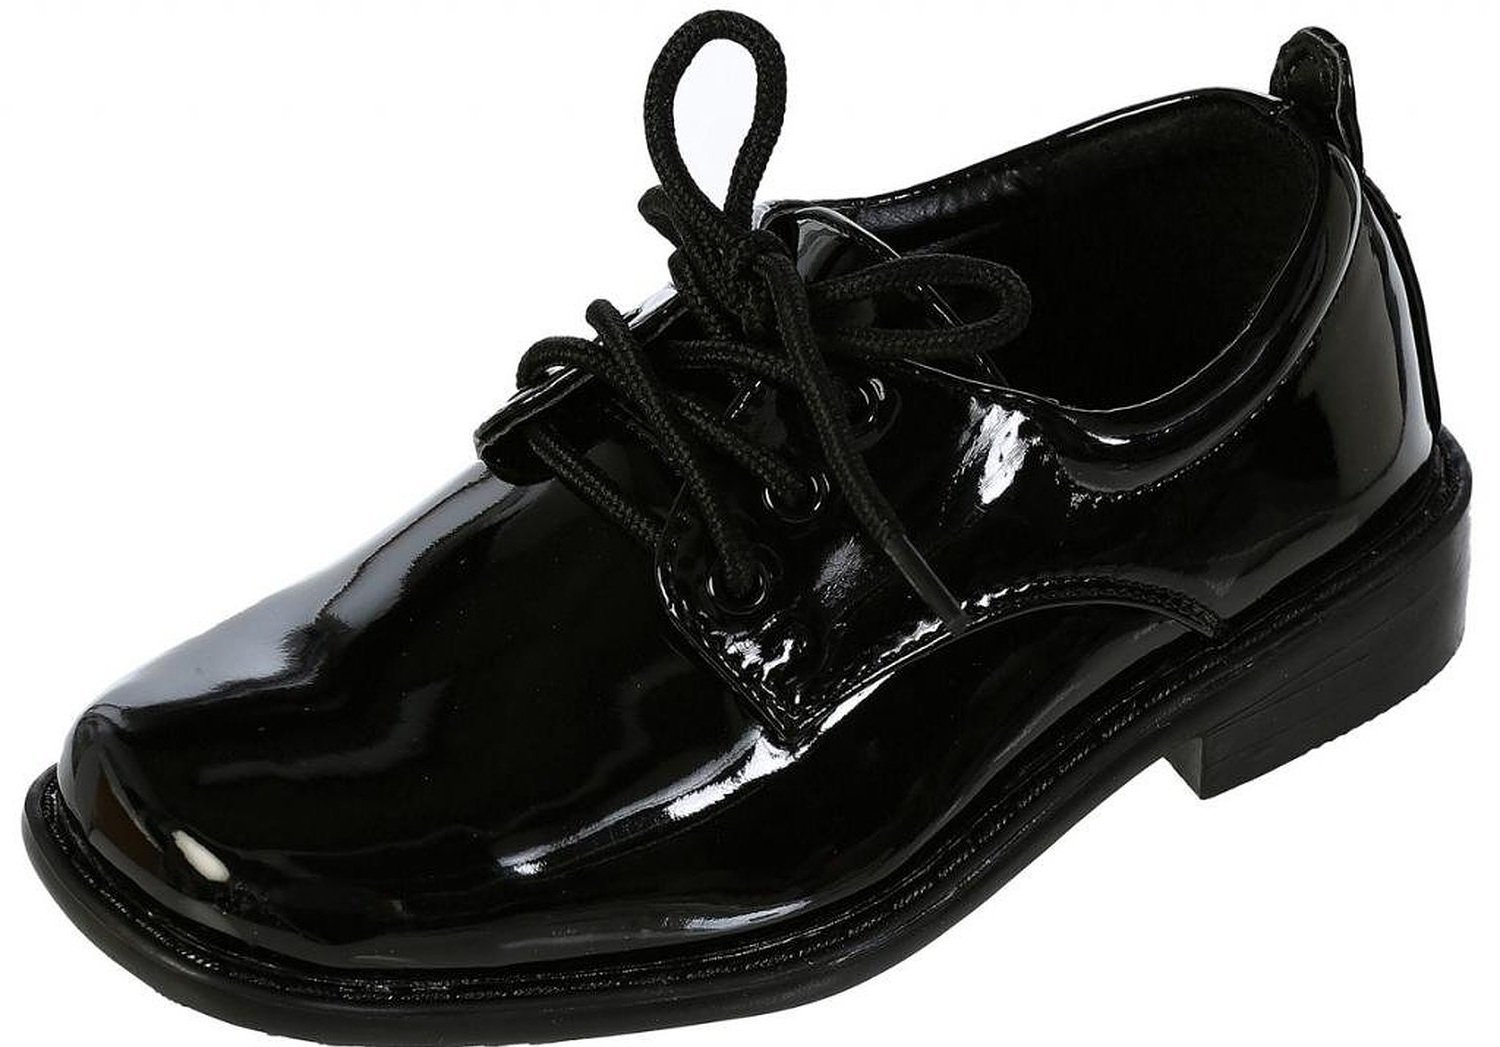 Boys Square Toe Lace Up Oxford Patent Dress Shoes - Available in Black 13 Little Kid